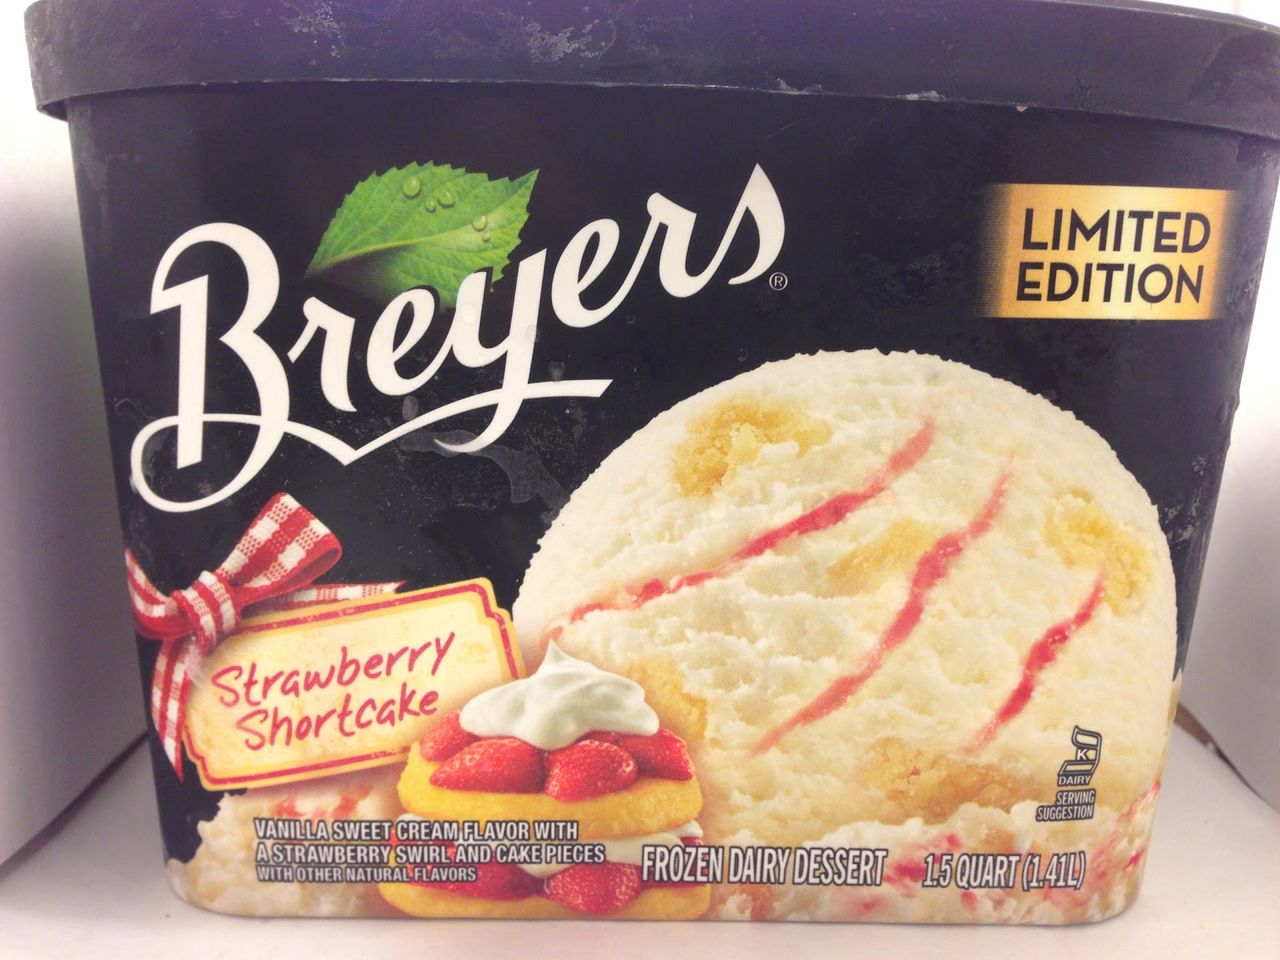 Bryers Ice Cream, the company that prided itself on using only few, all natural ingredients had to change their labels to read “Frozen Dairy Dessert” because based on the ingredients they couldn’t legally sell their product as ice cream.